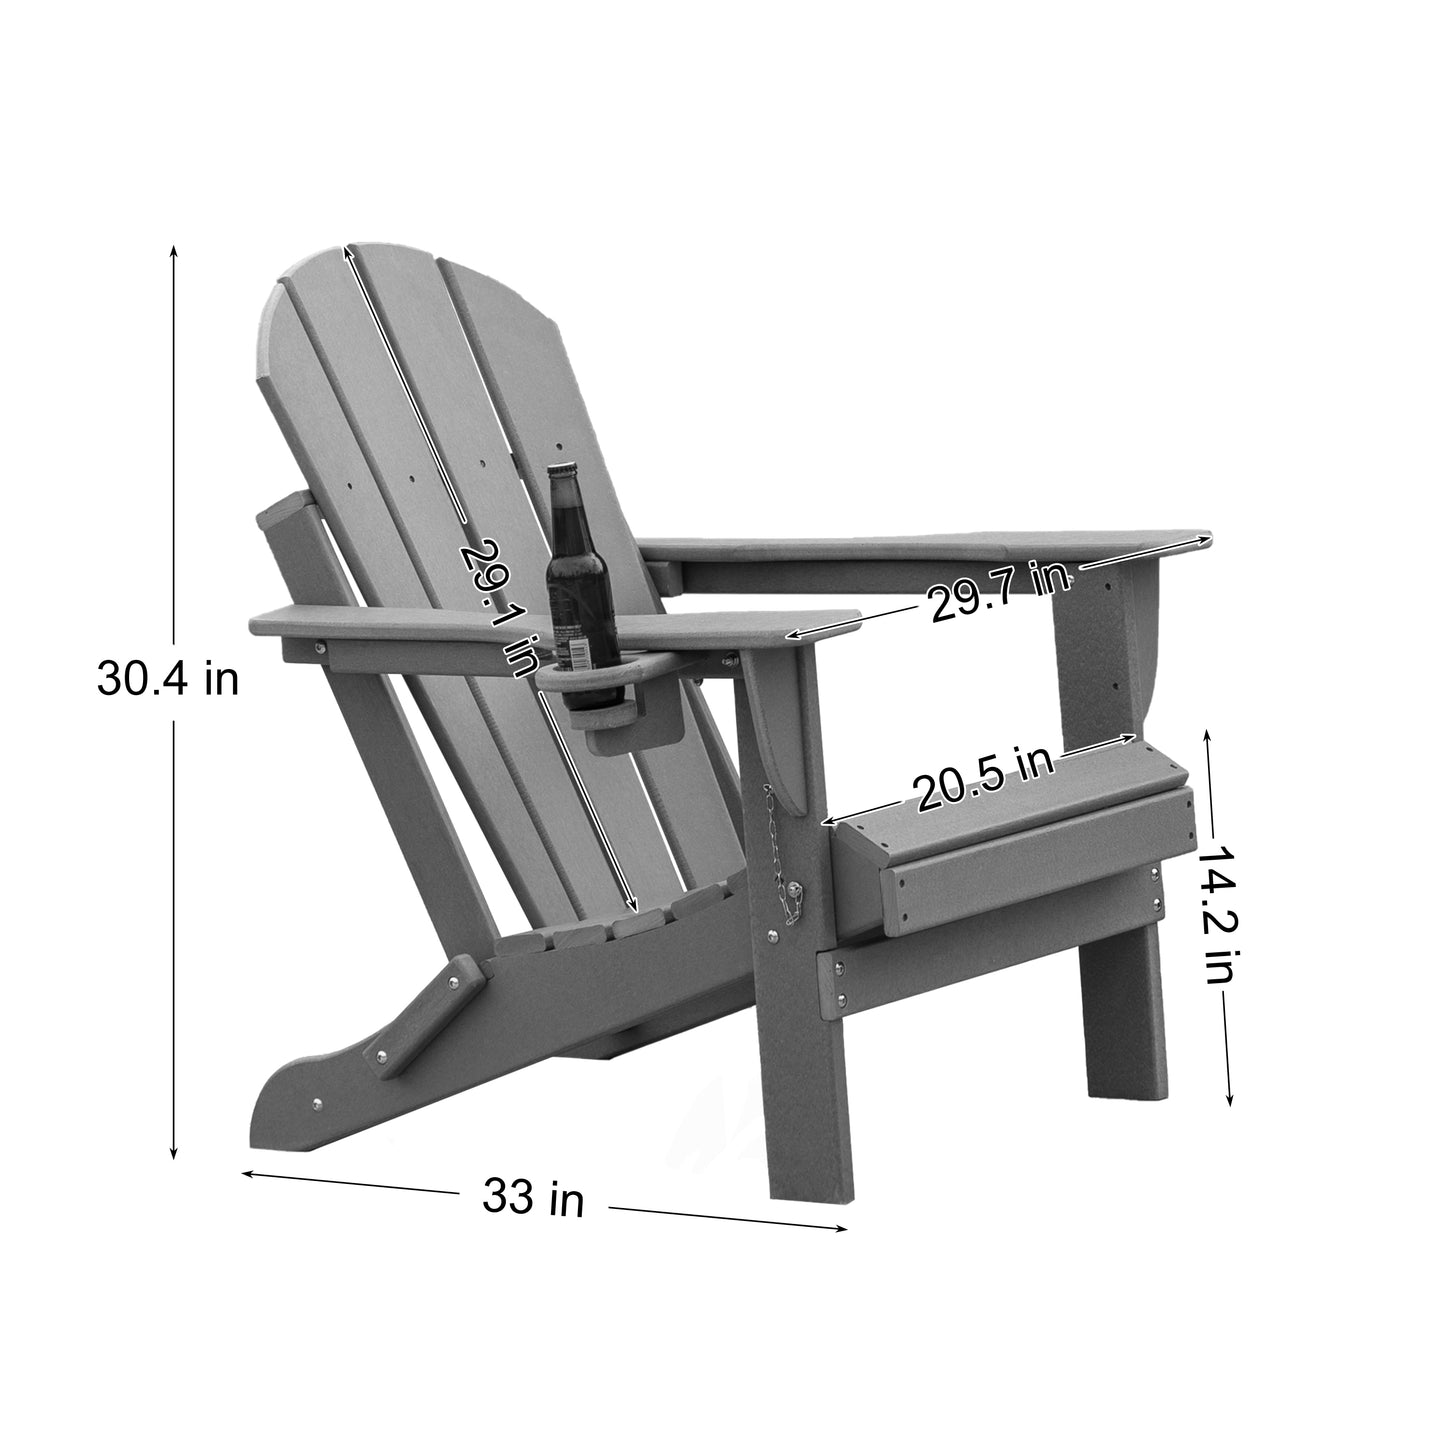 Waytrim Solid Wood Adirondack Foldable Chair With Drinks Place